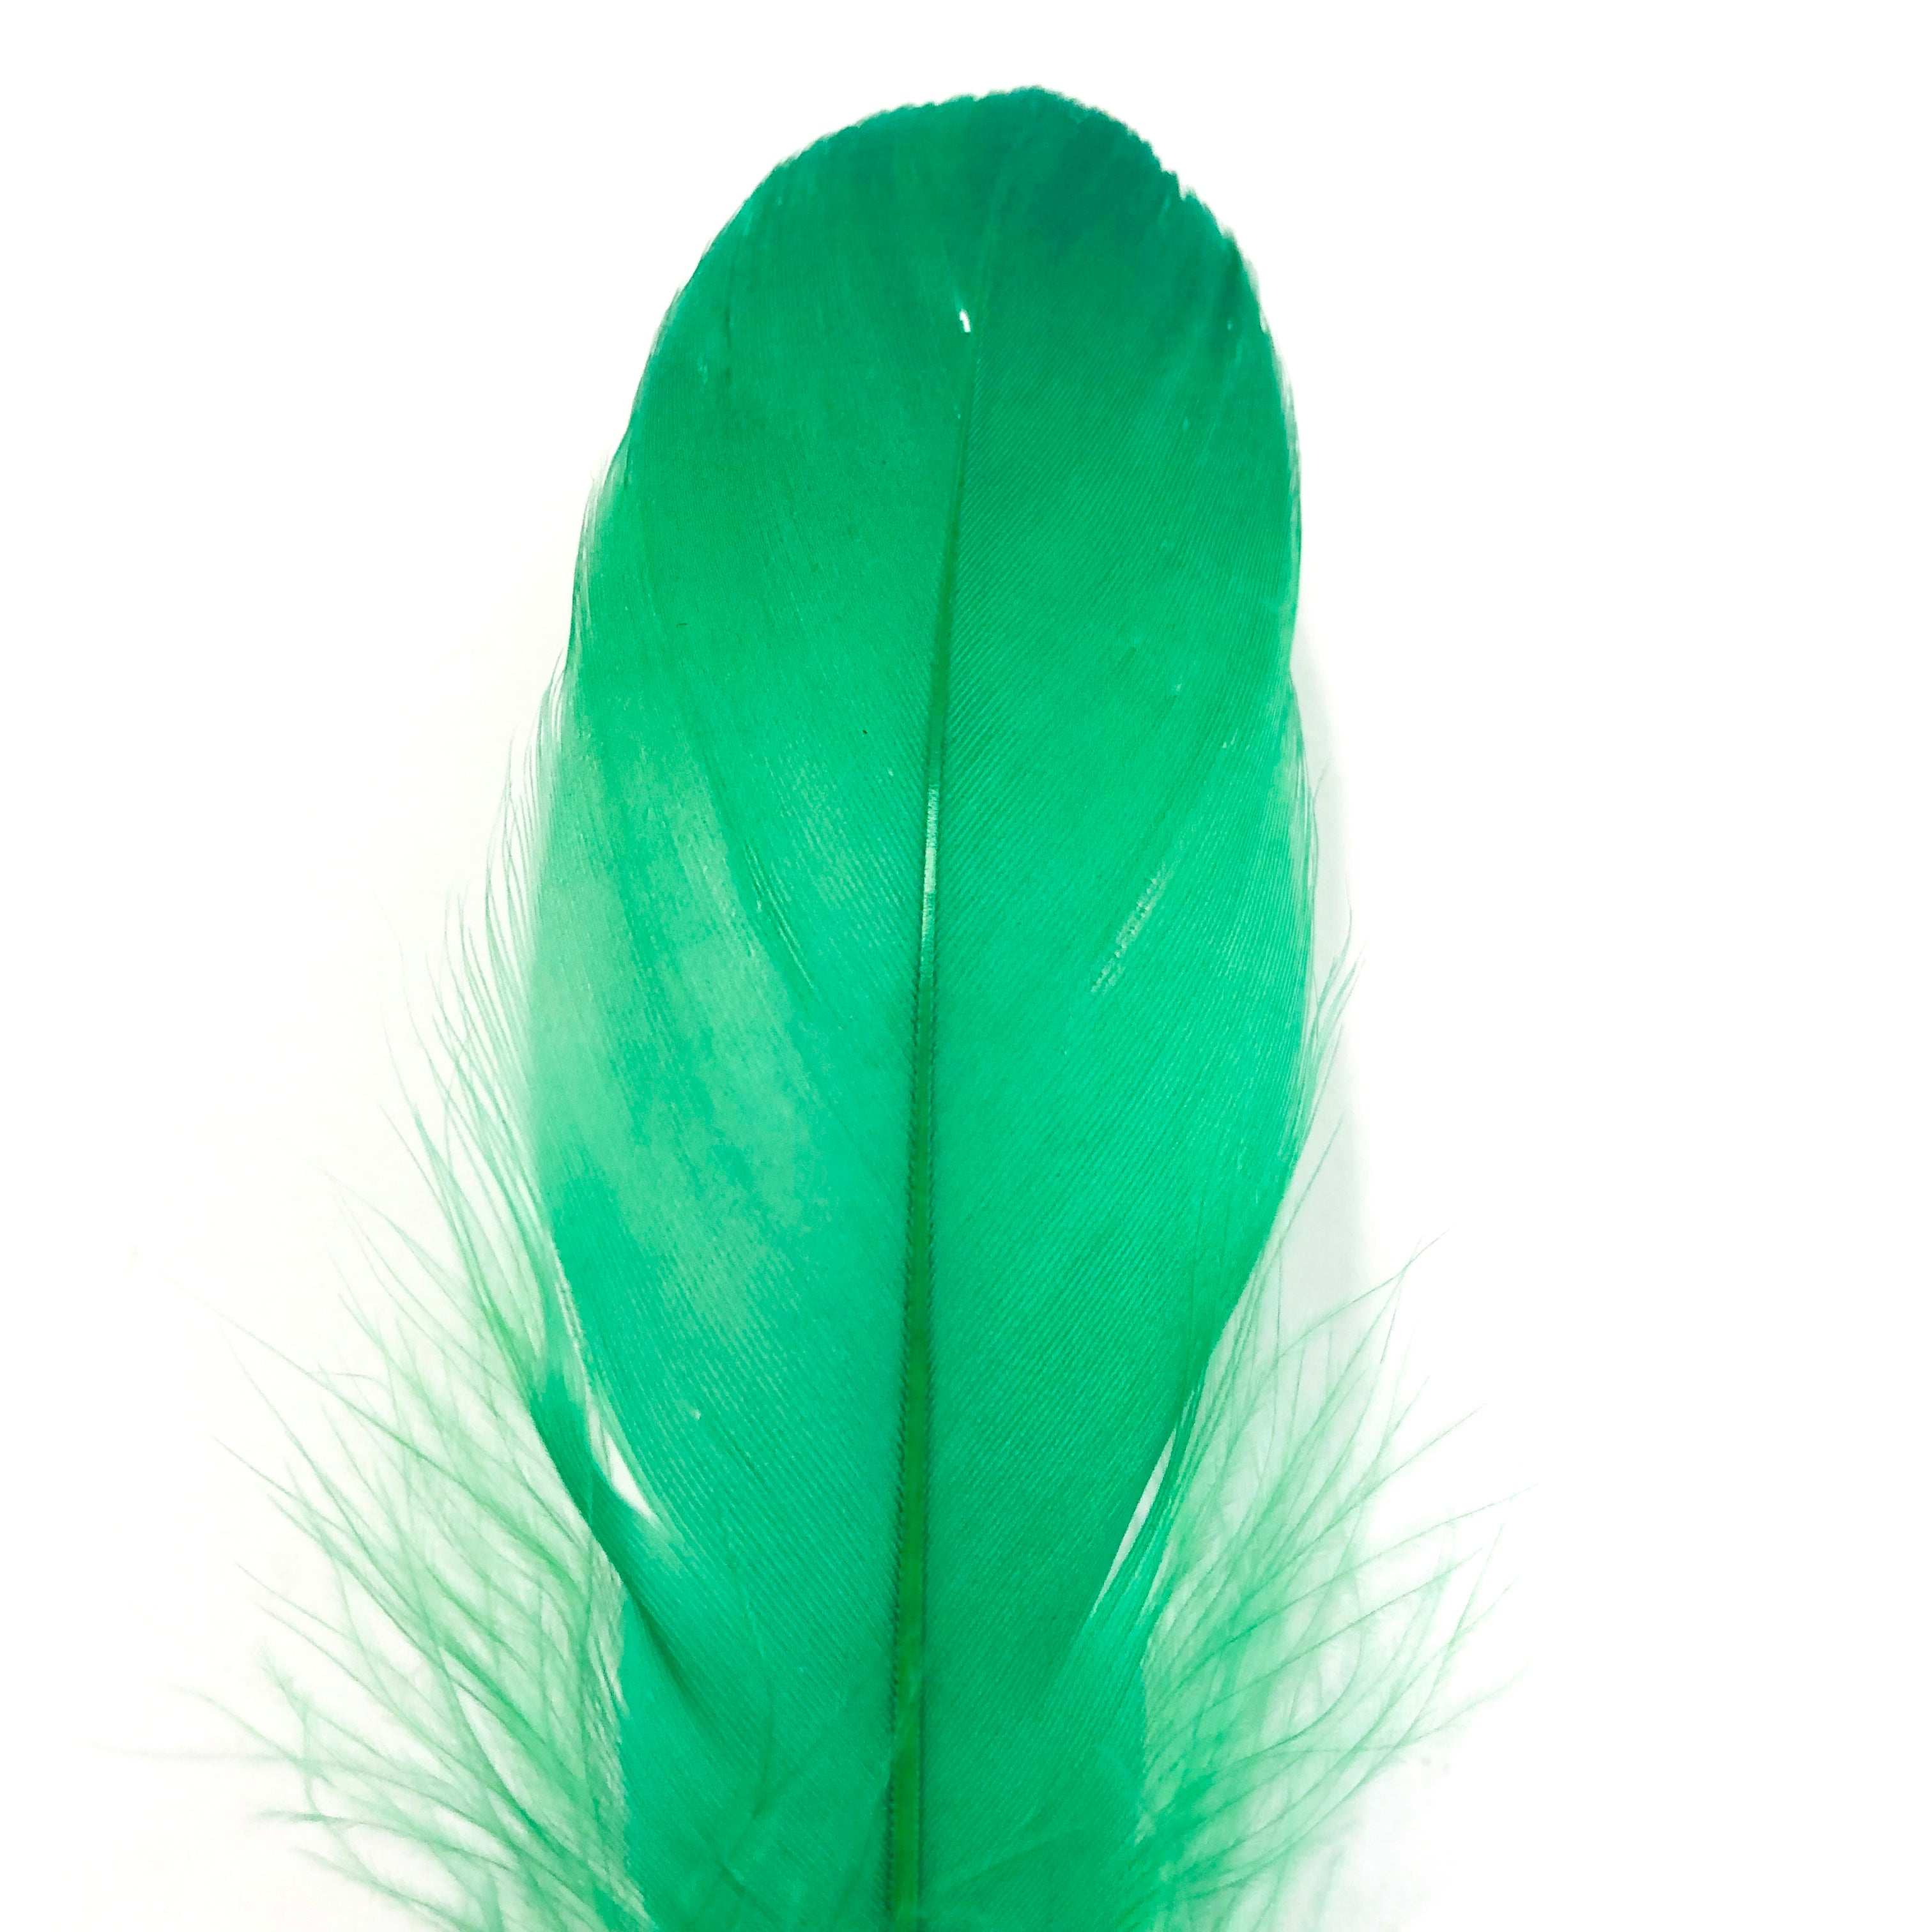 Goose Nagoire Feathers 10 grams - Green